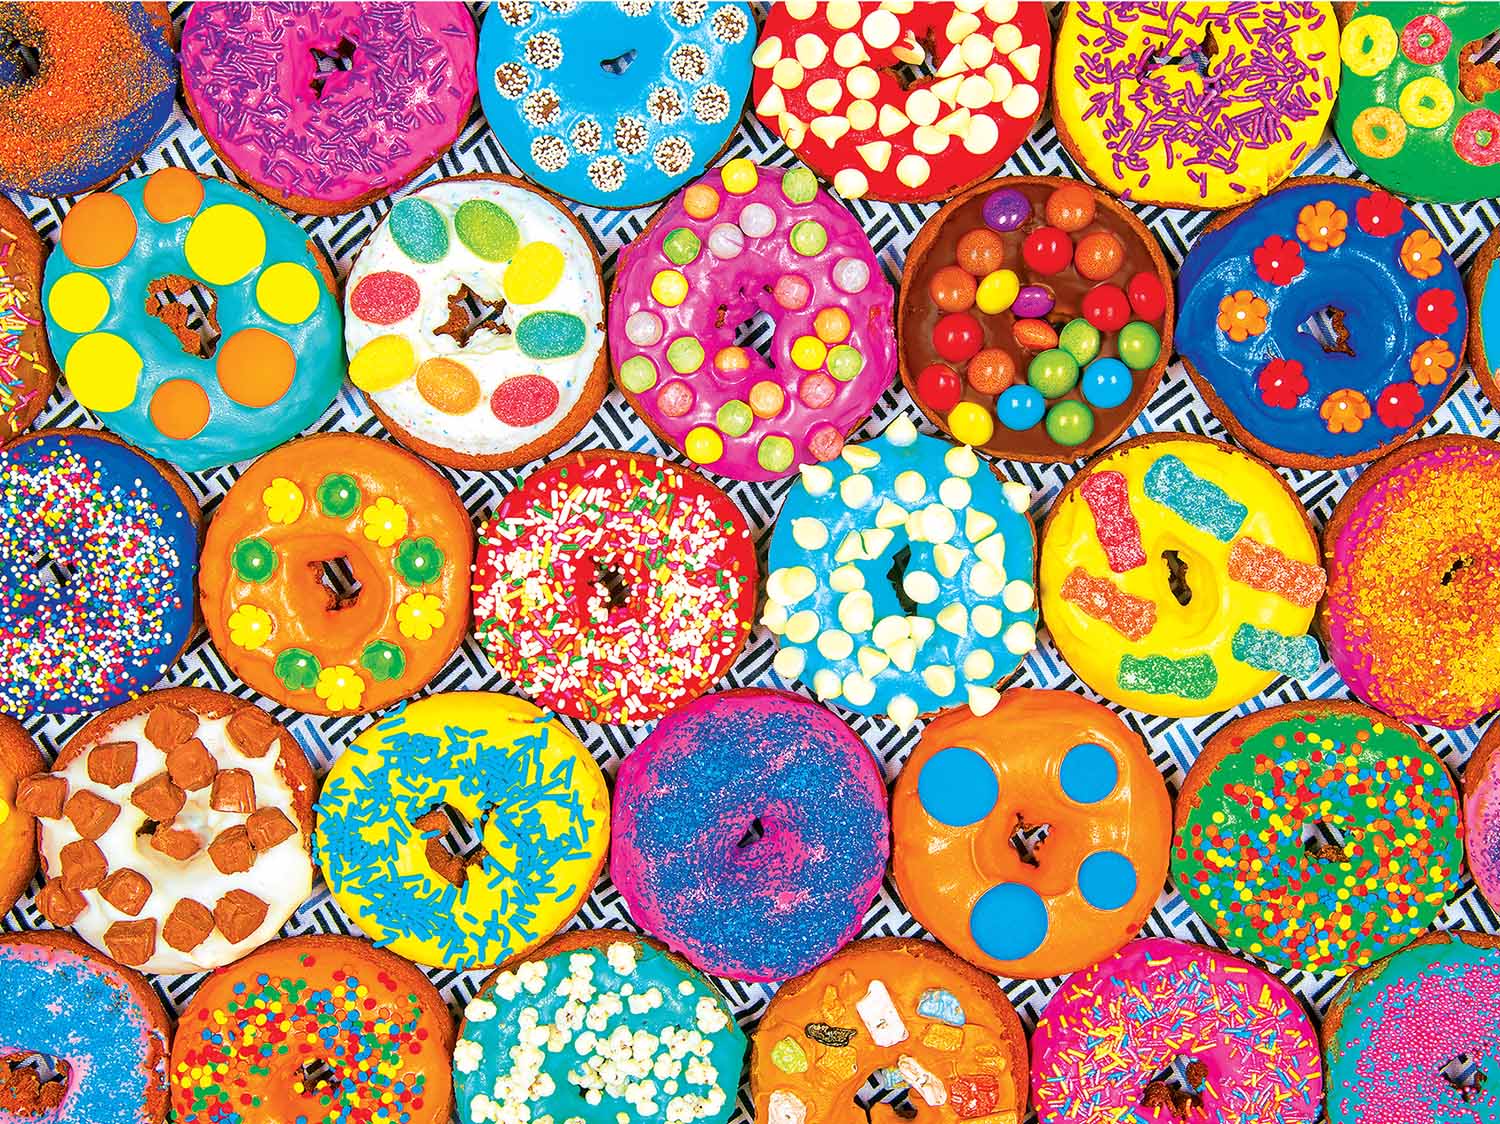 Colorluxe -  Colorful Candy Donuts Dessert & Sweets Jigsaw Puzzle